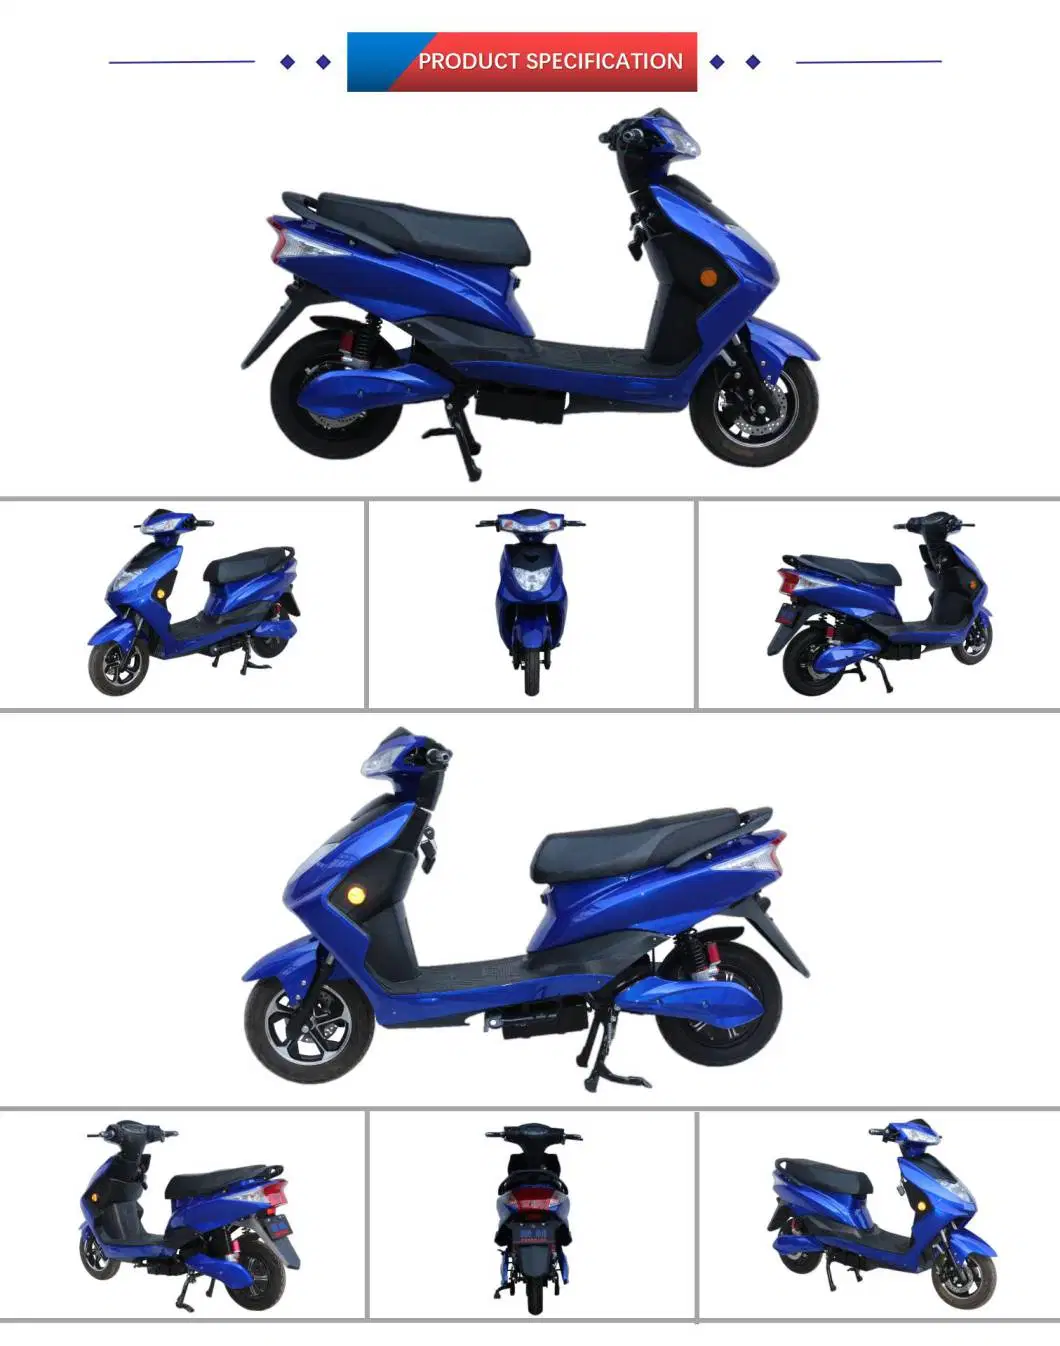 Market Hot Two Wheel 800W 72V 32ah Electric Scooter/Motorcycle From China